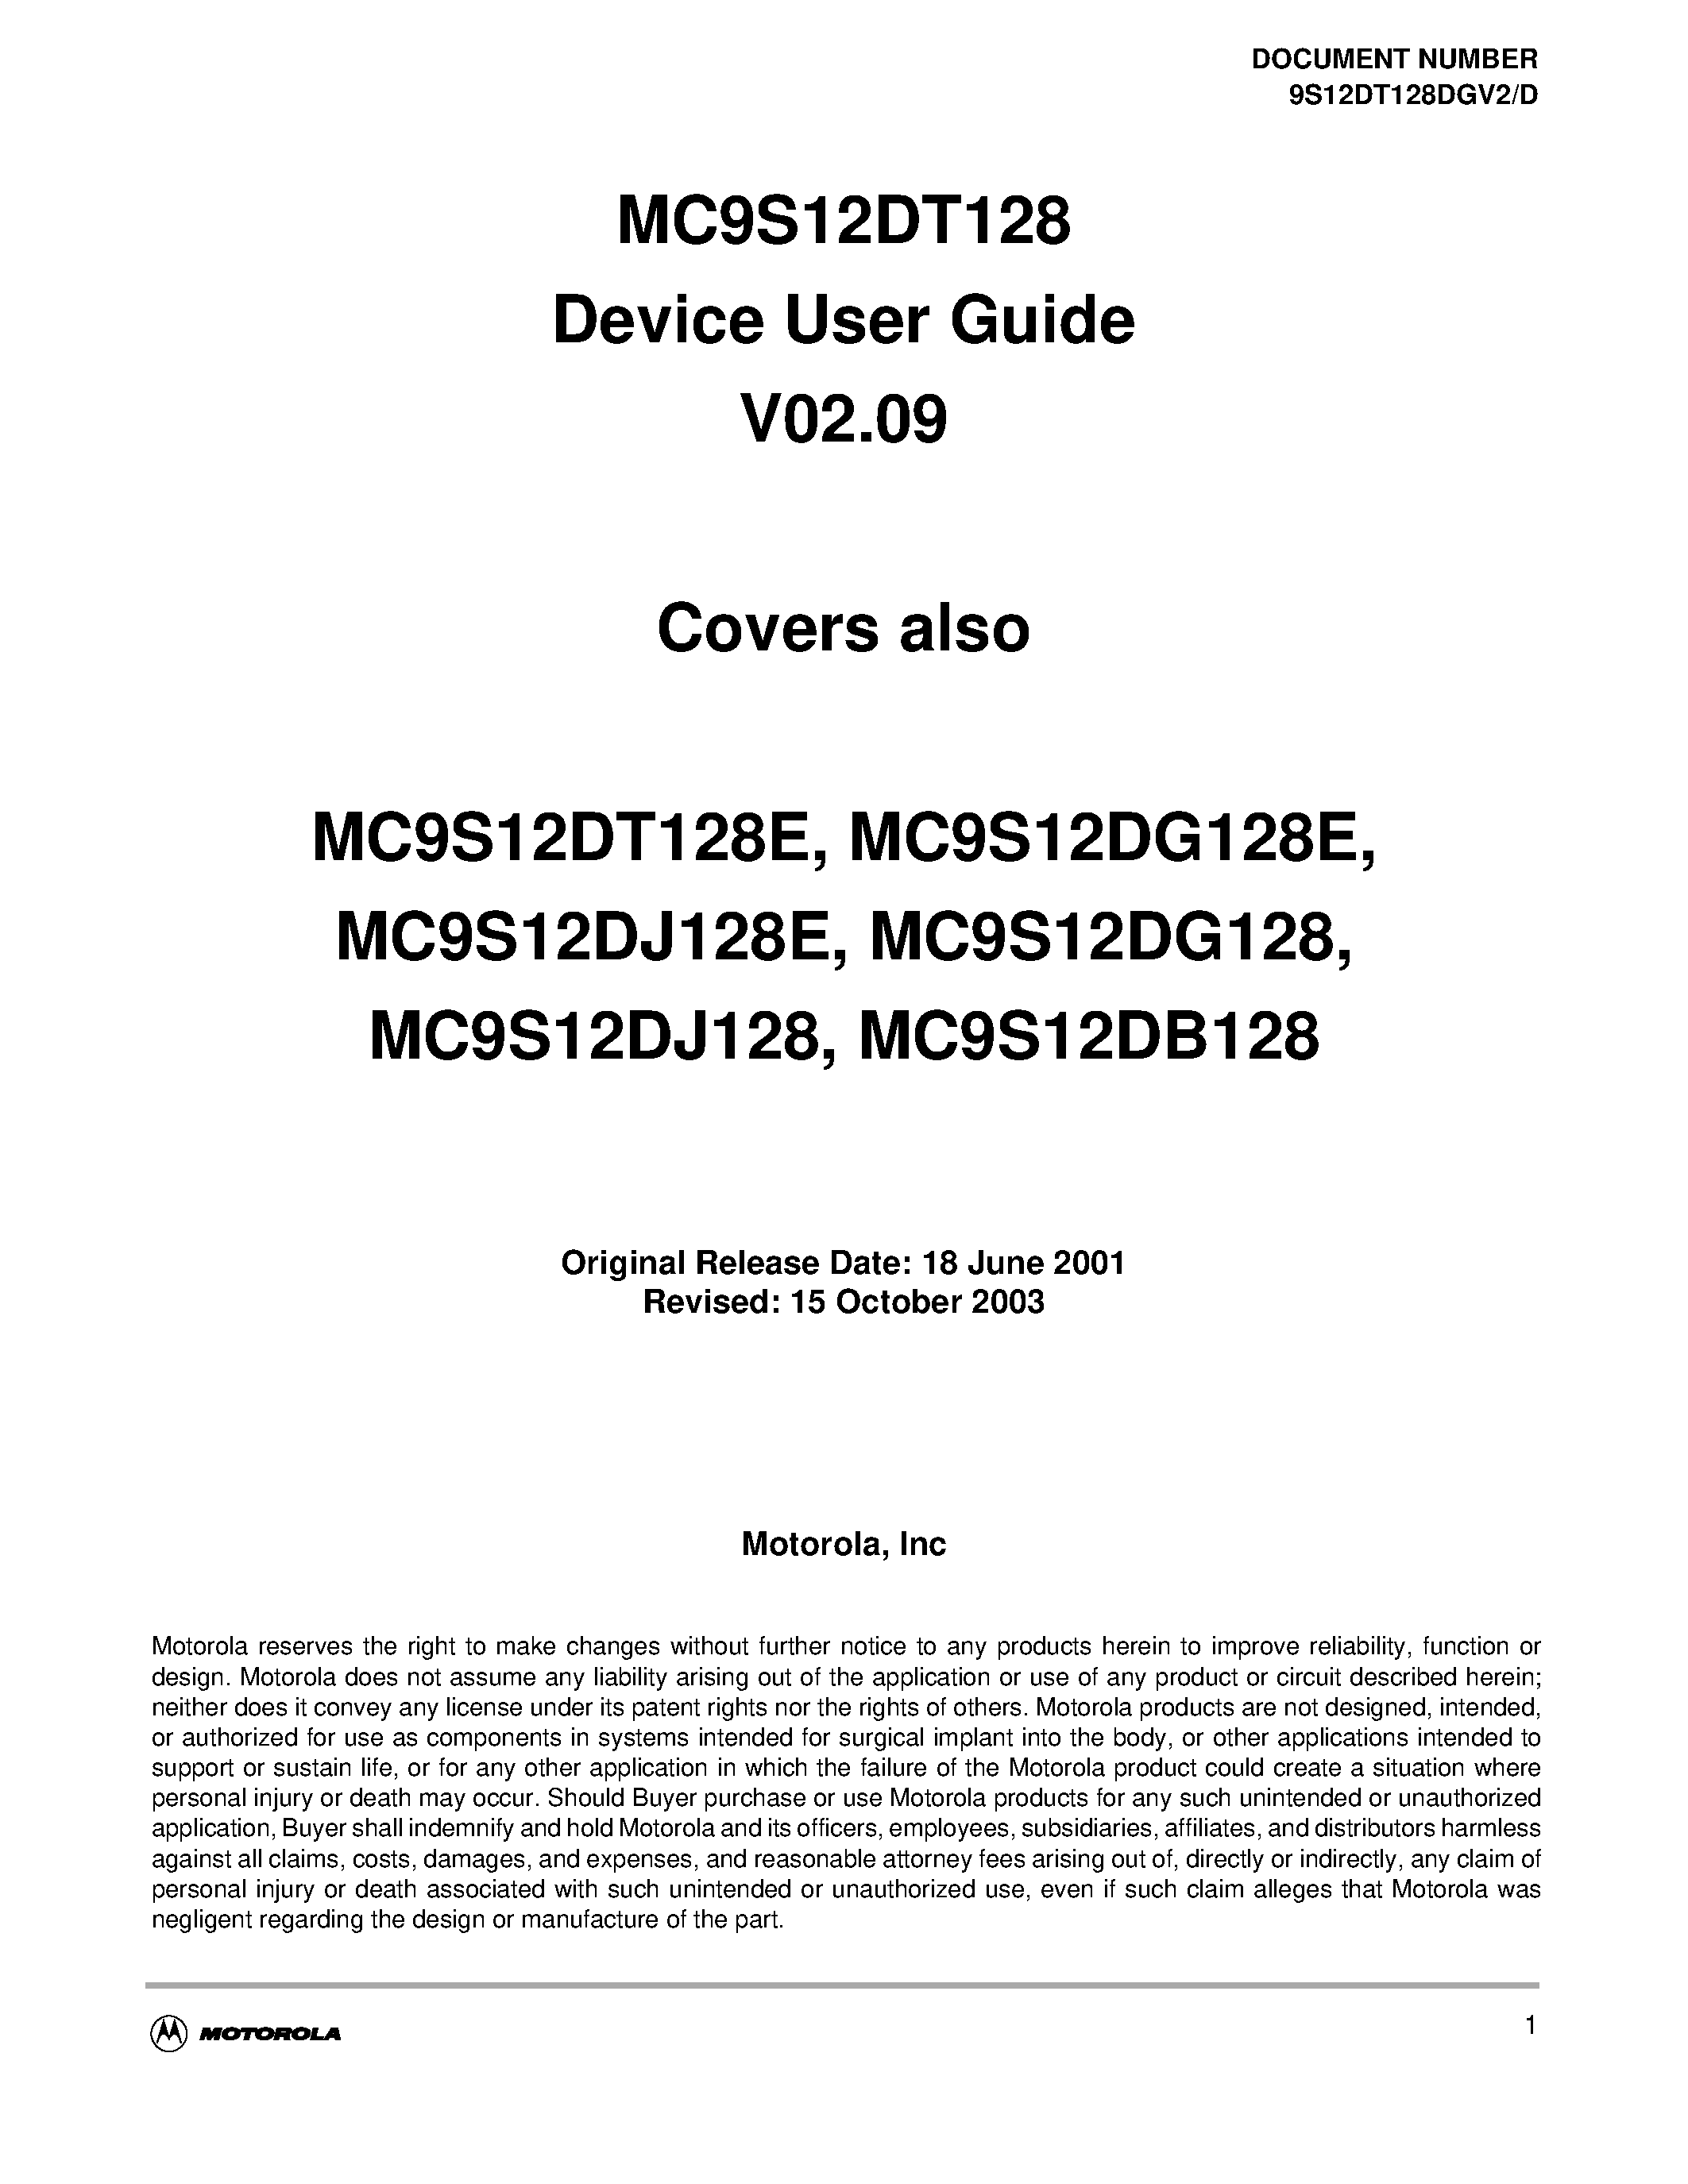 Datasheet S12CPUV2D - MC9S12DT128 Device User Guide V02.09 page 1